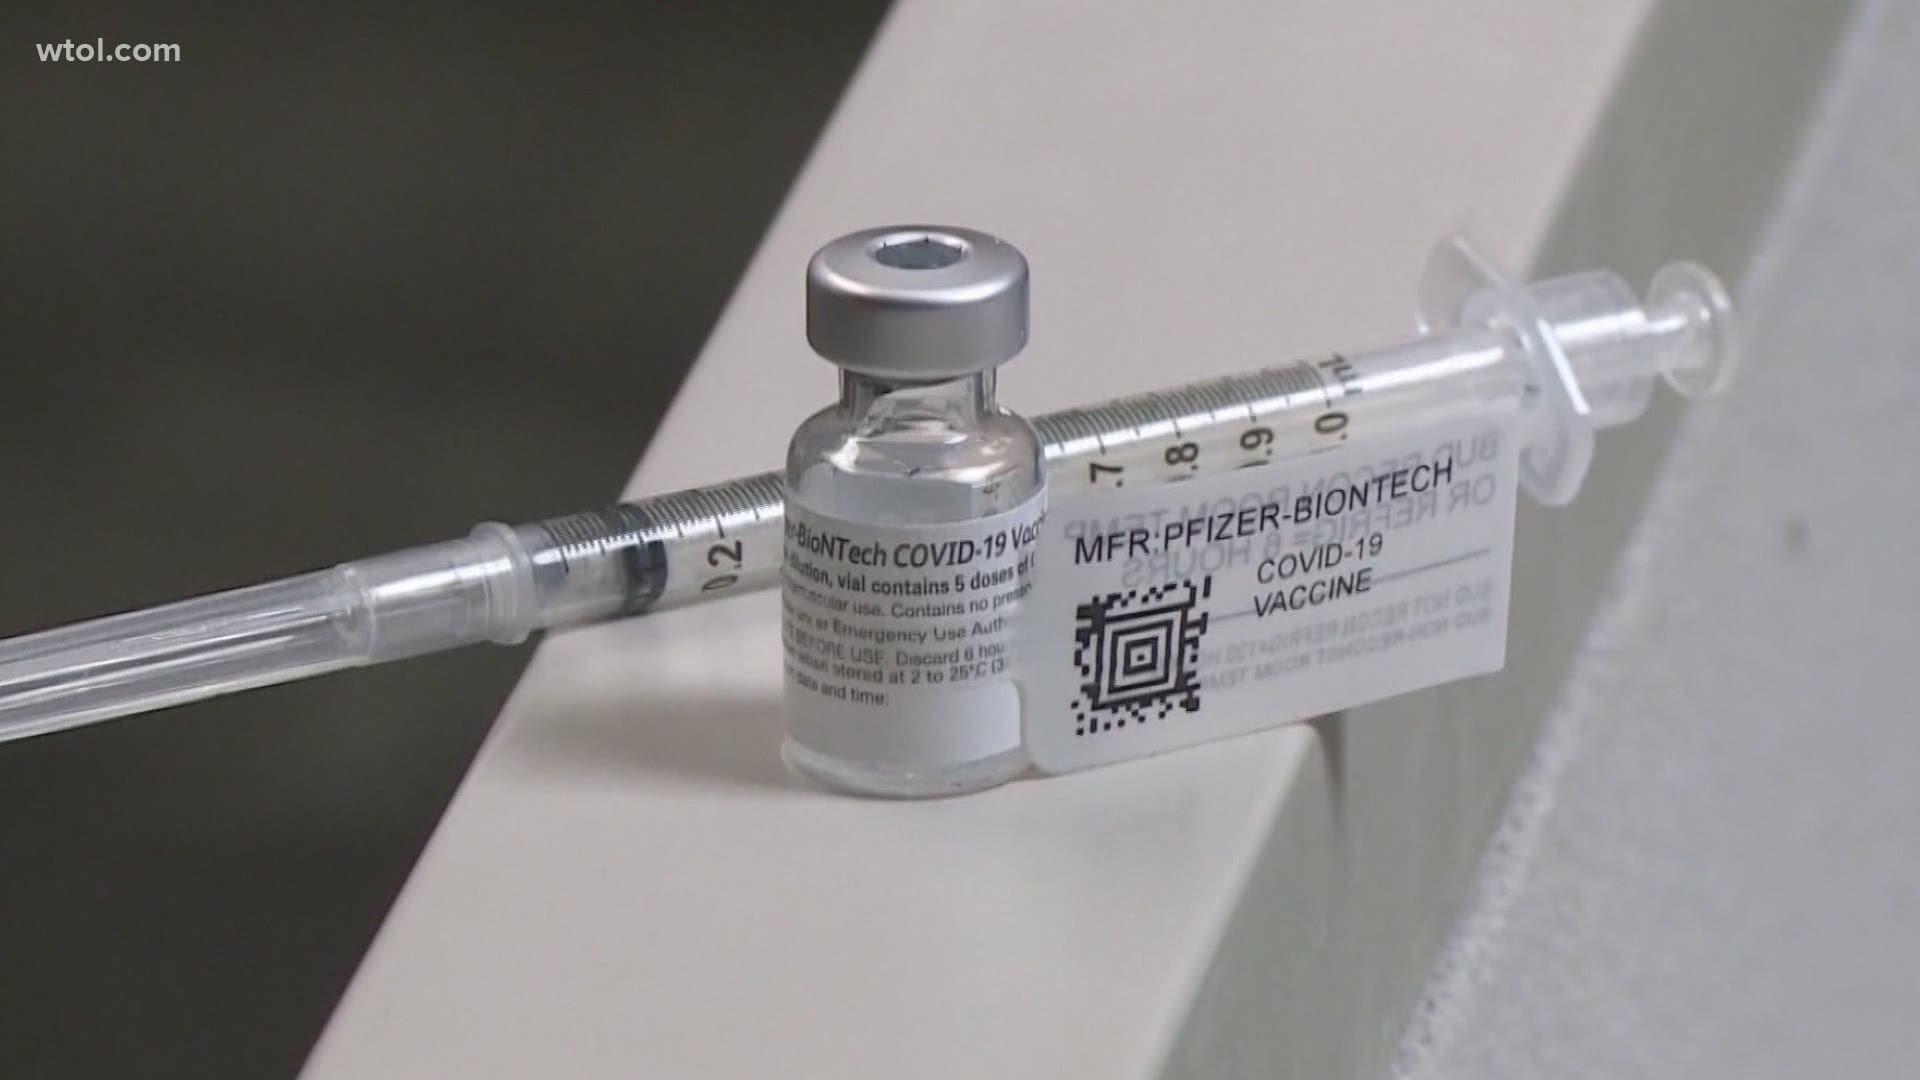 Regina A. Russell, a registered nurse, says the vaccine is the best method for preventing transmission and contraction of the virus for the older population.